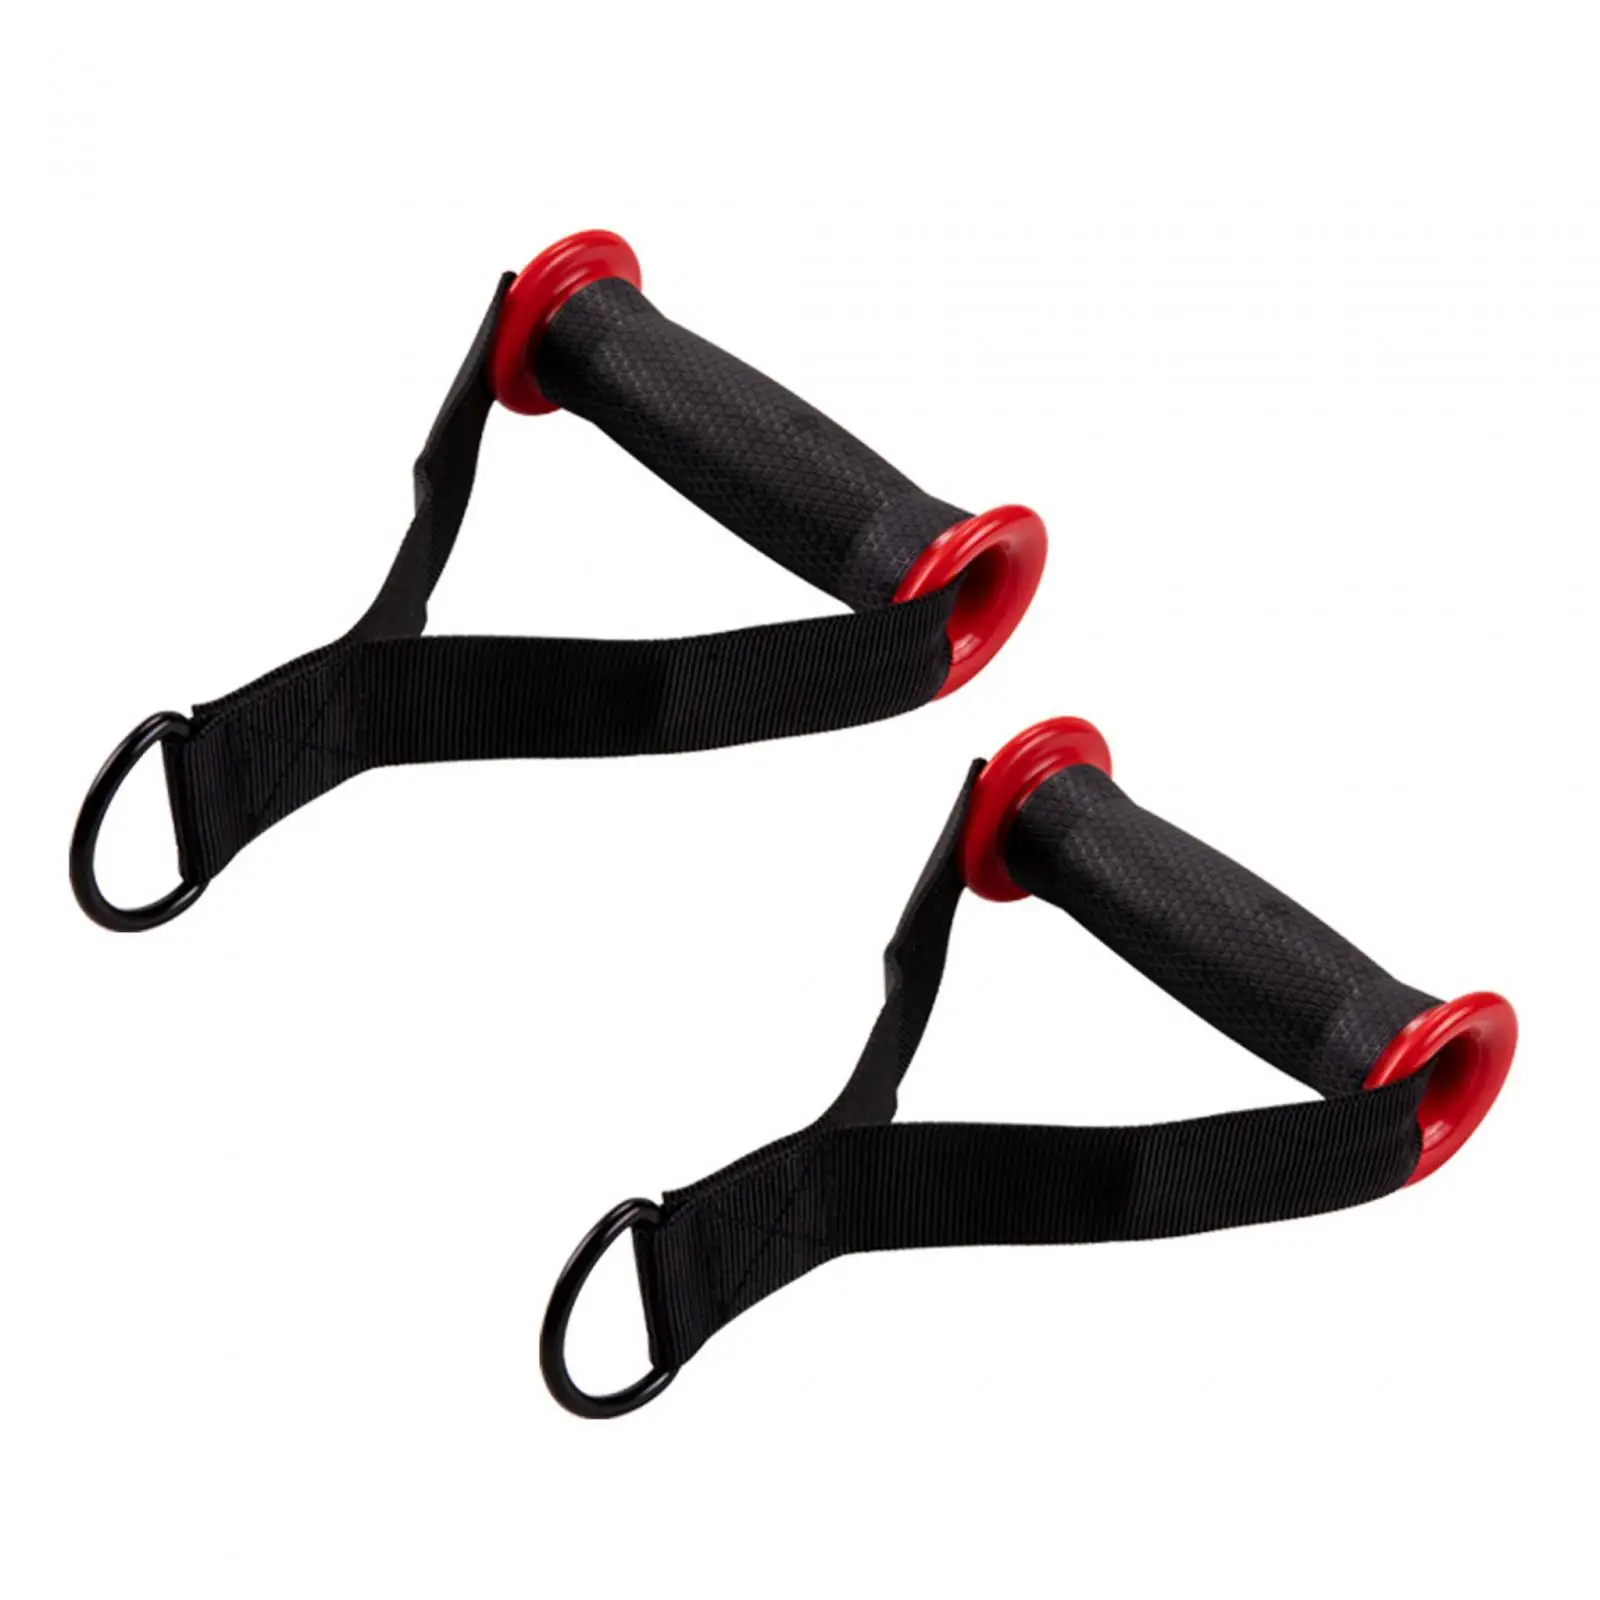 2 Pieces Gym Handle Accessories Ab Workout Universal Stretch Tube Gym Accessory Push Pull Resistance Exercise Pull up Handles